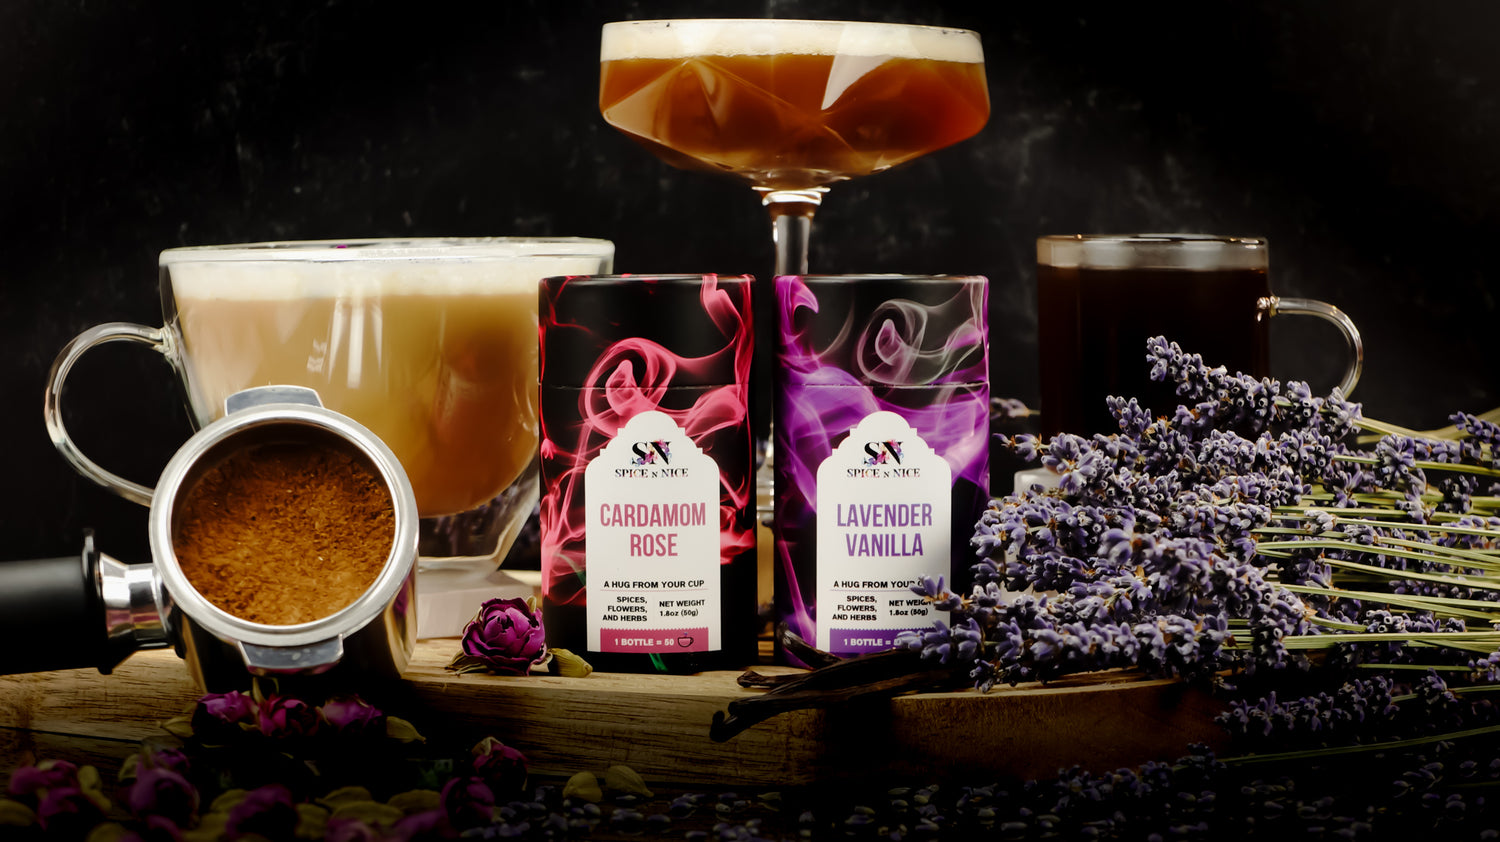 Cardamom Rose and Lavender Vanilla product photo with natural ingredients and different types of coffee beverages